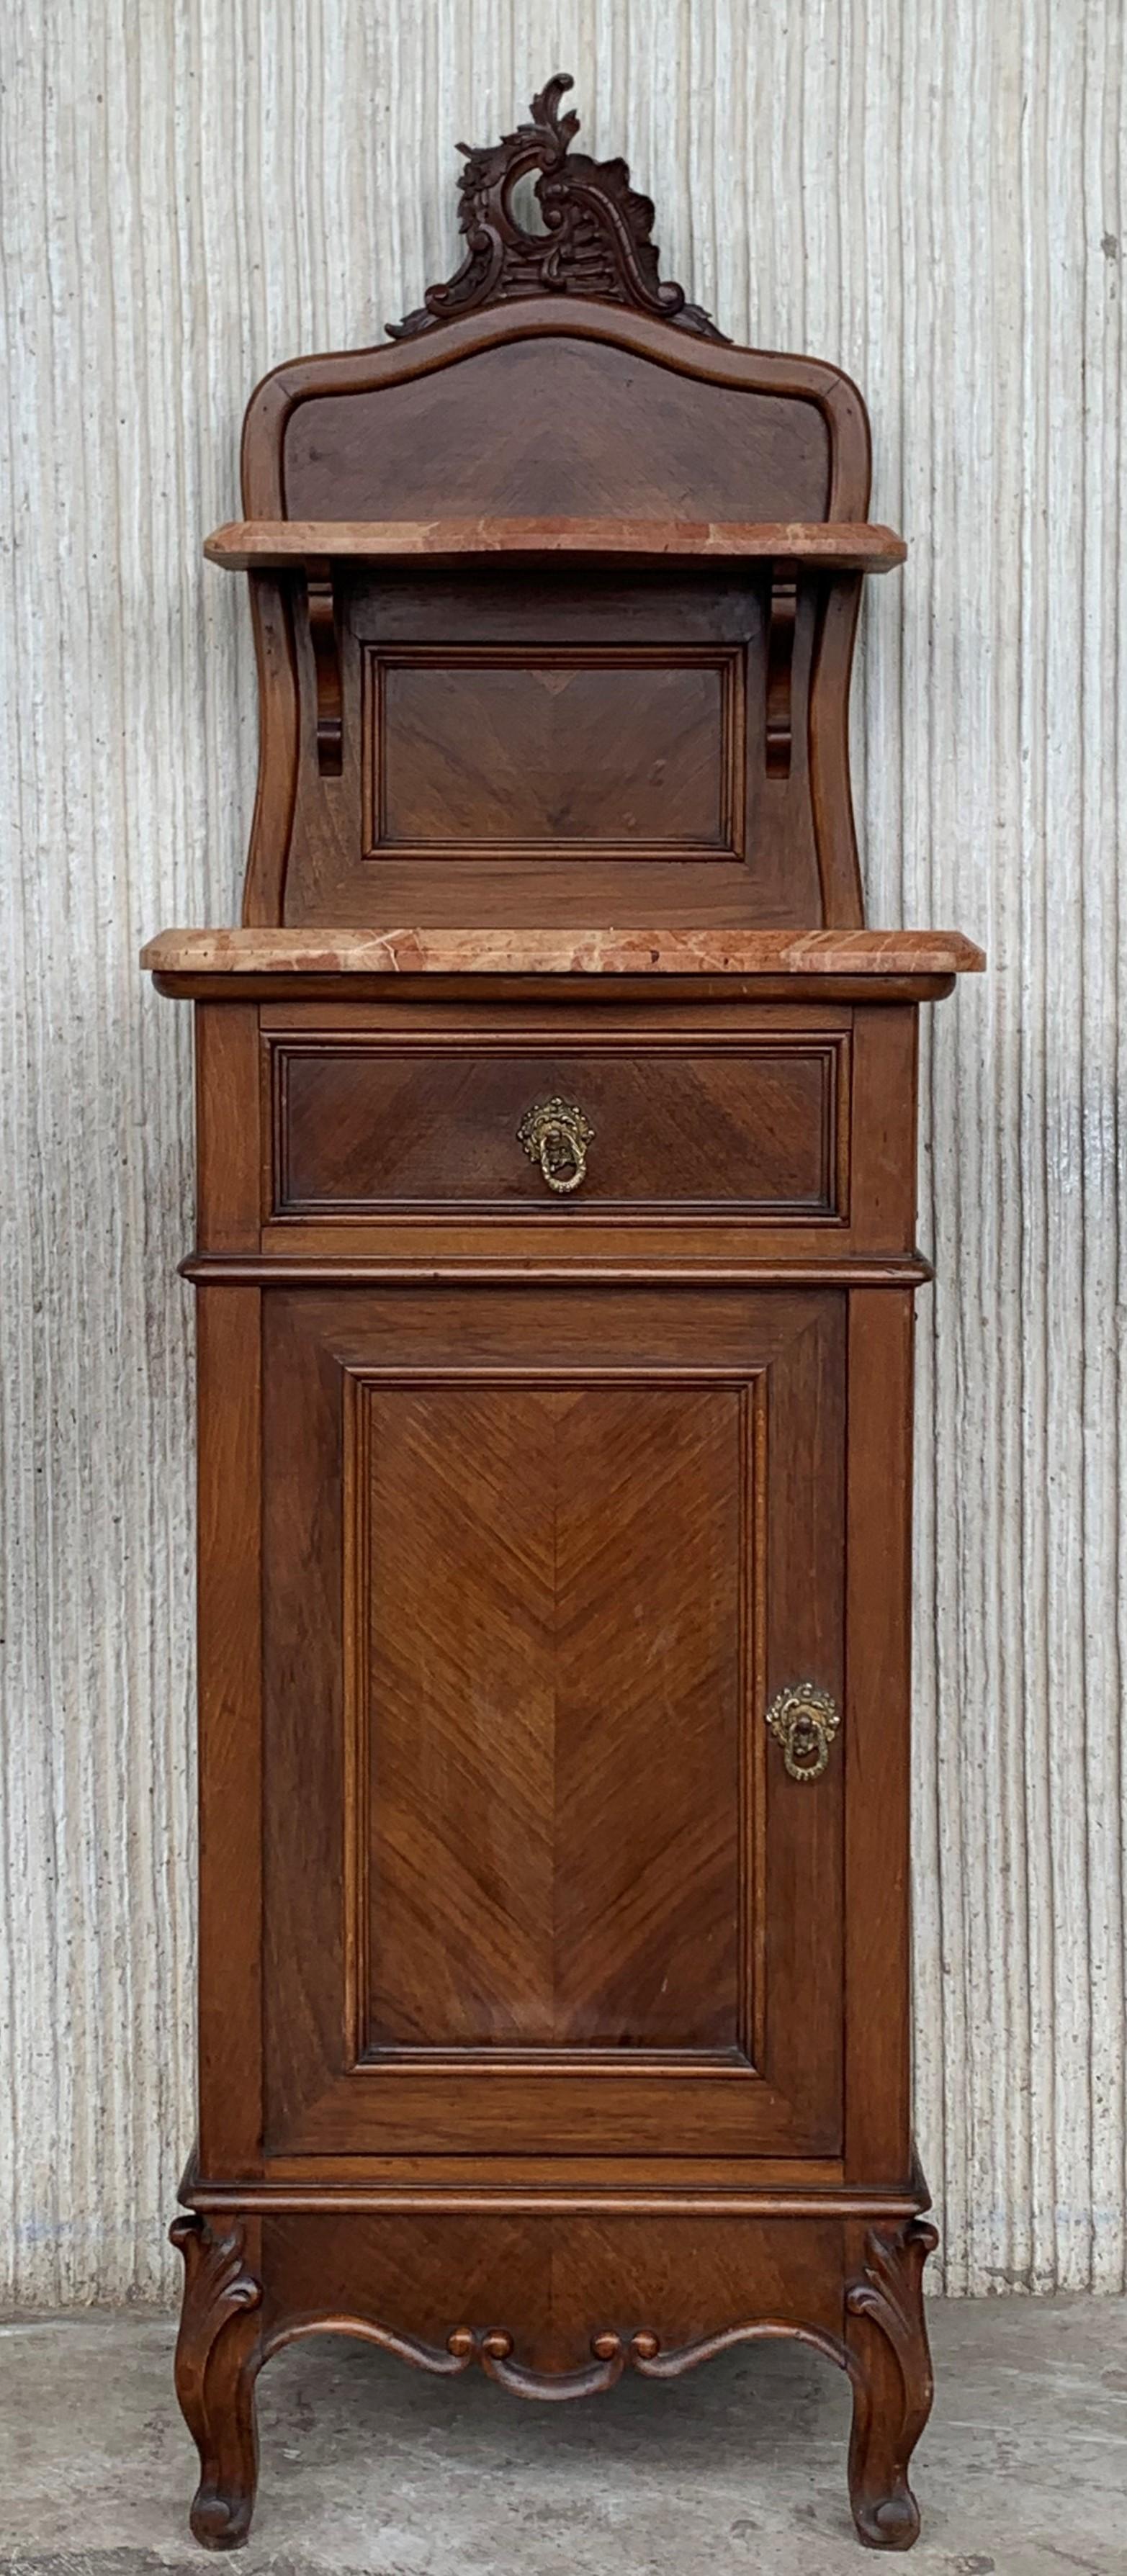 Late 19th century Art Nouveau pair of nightstands in walnut, bronze handles, restored and polished to wax.
Measures: Height to the top 52.75in
Height to the table 33.26in.